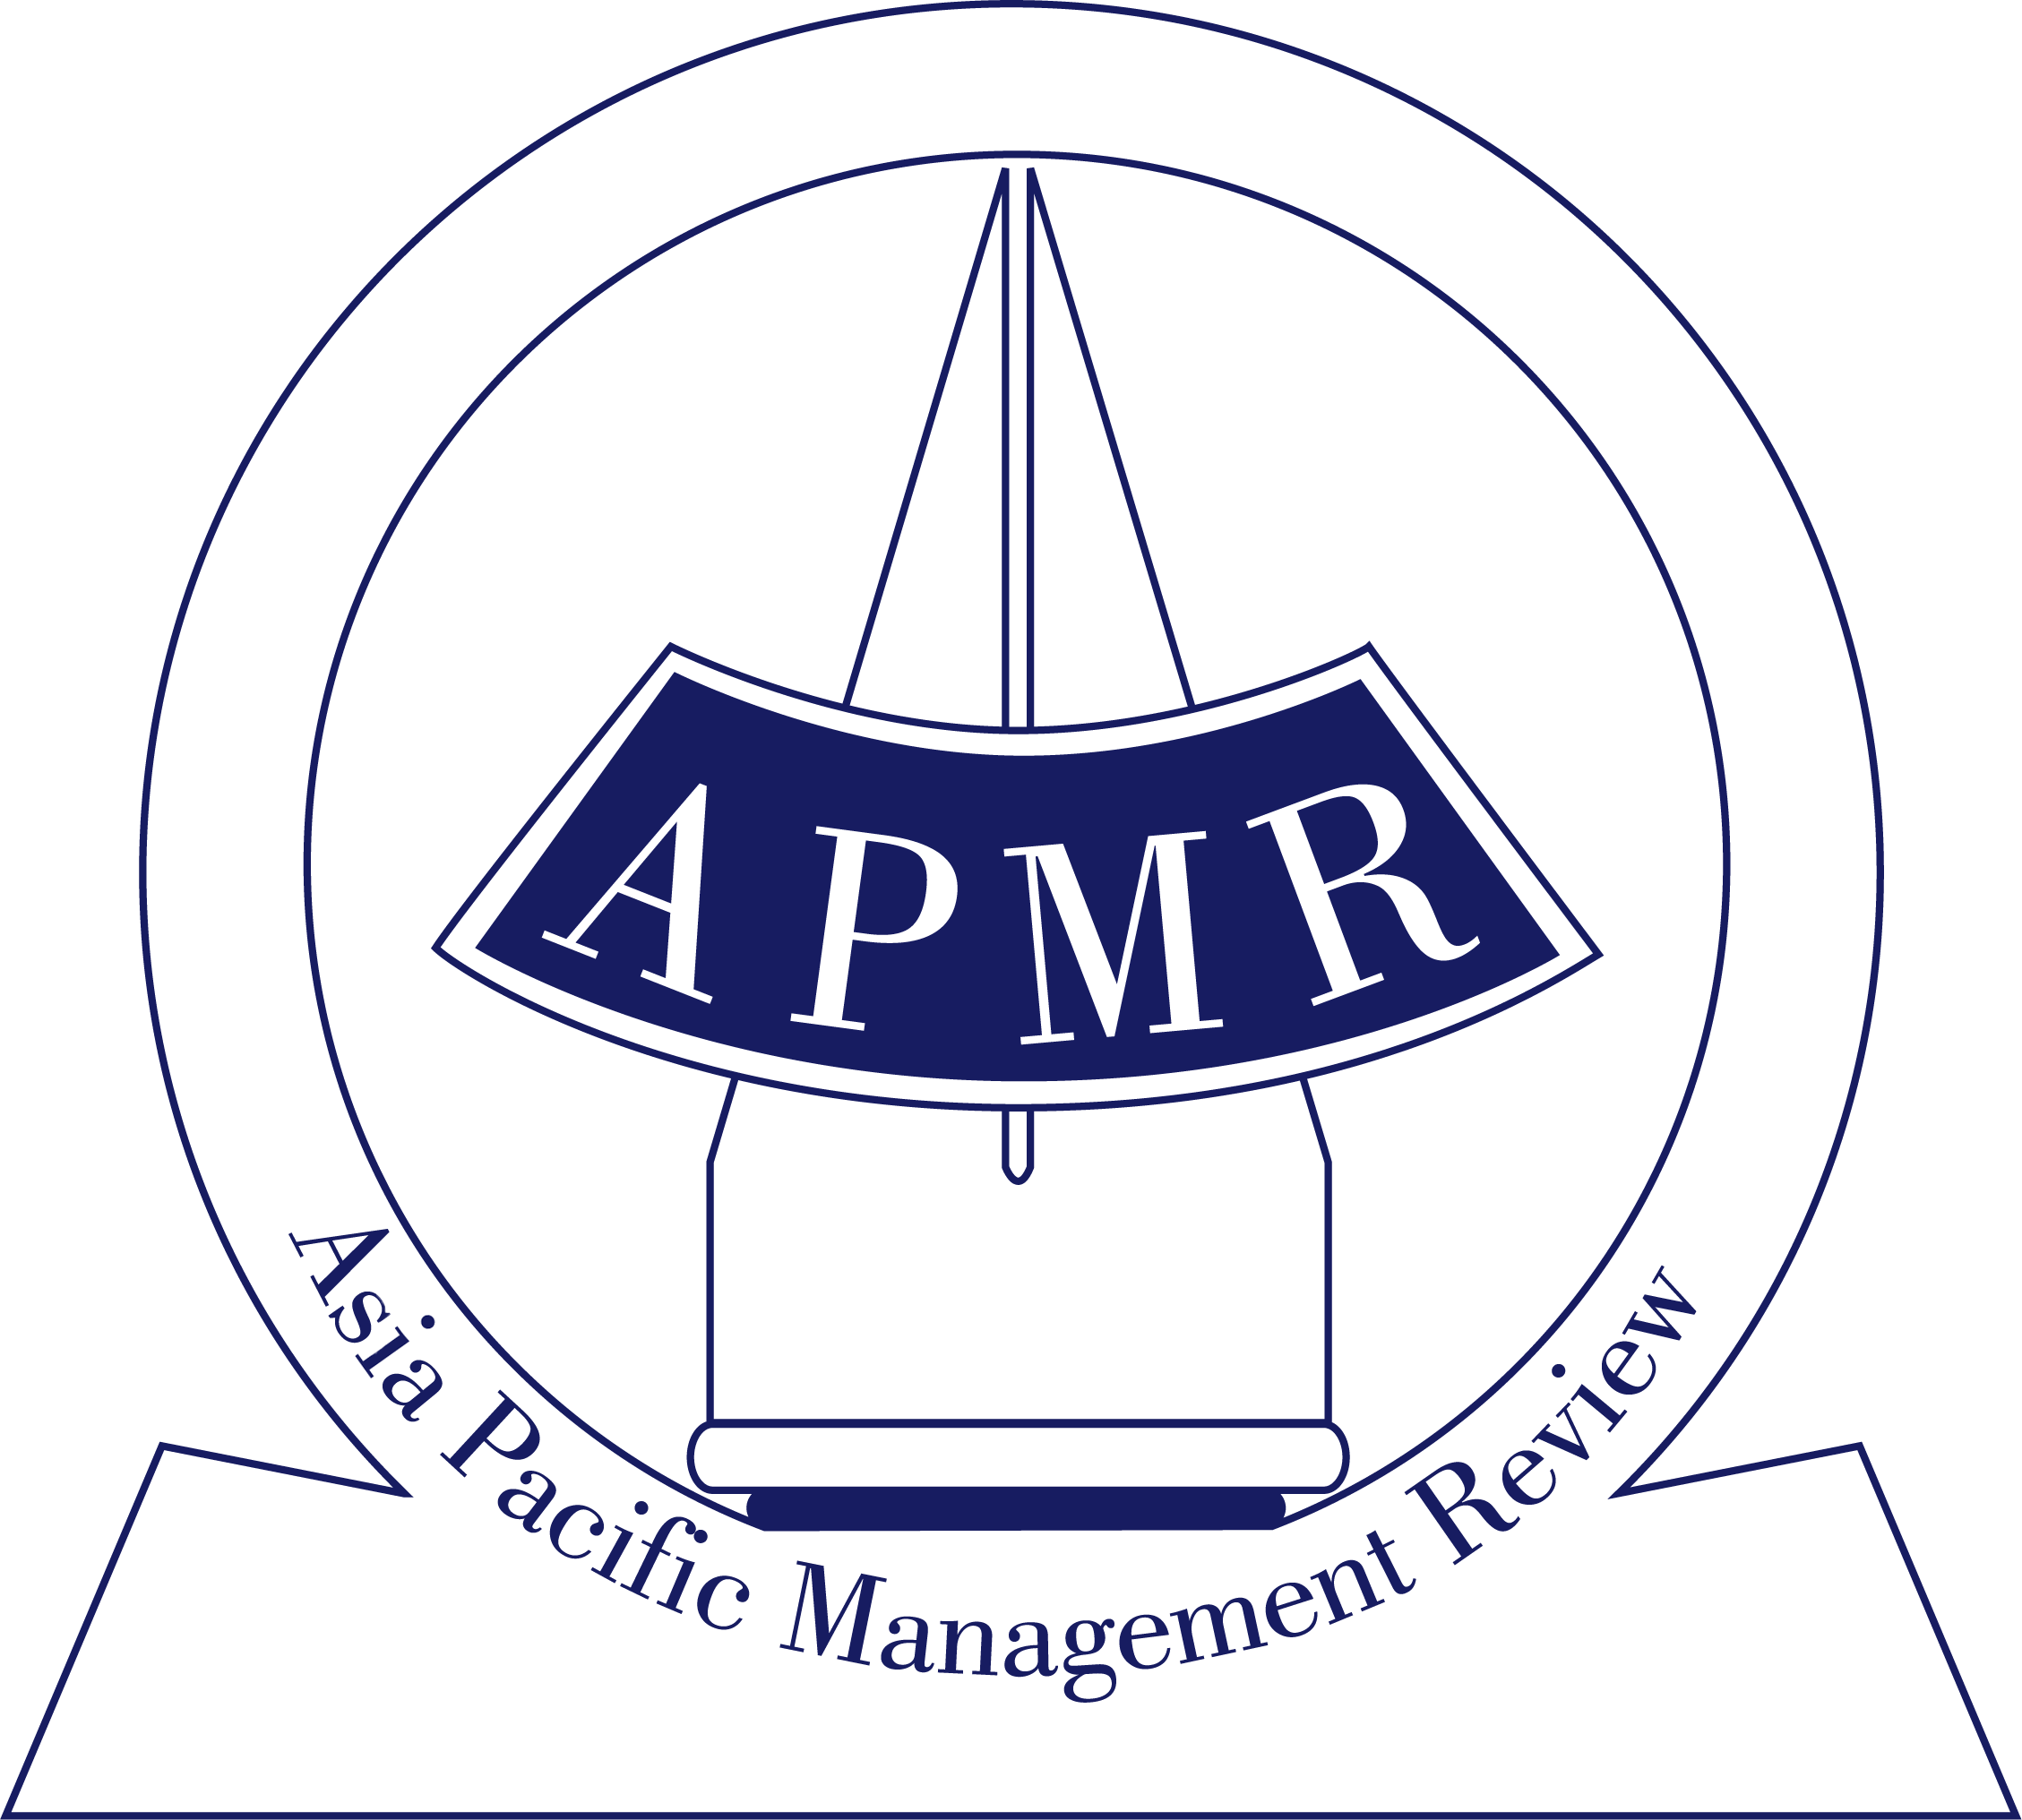 Asia Pacific Management Review(APMR)